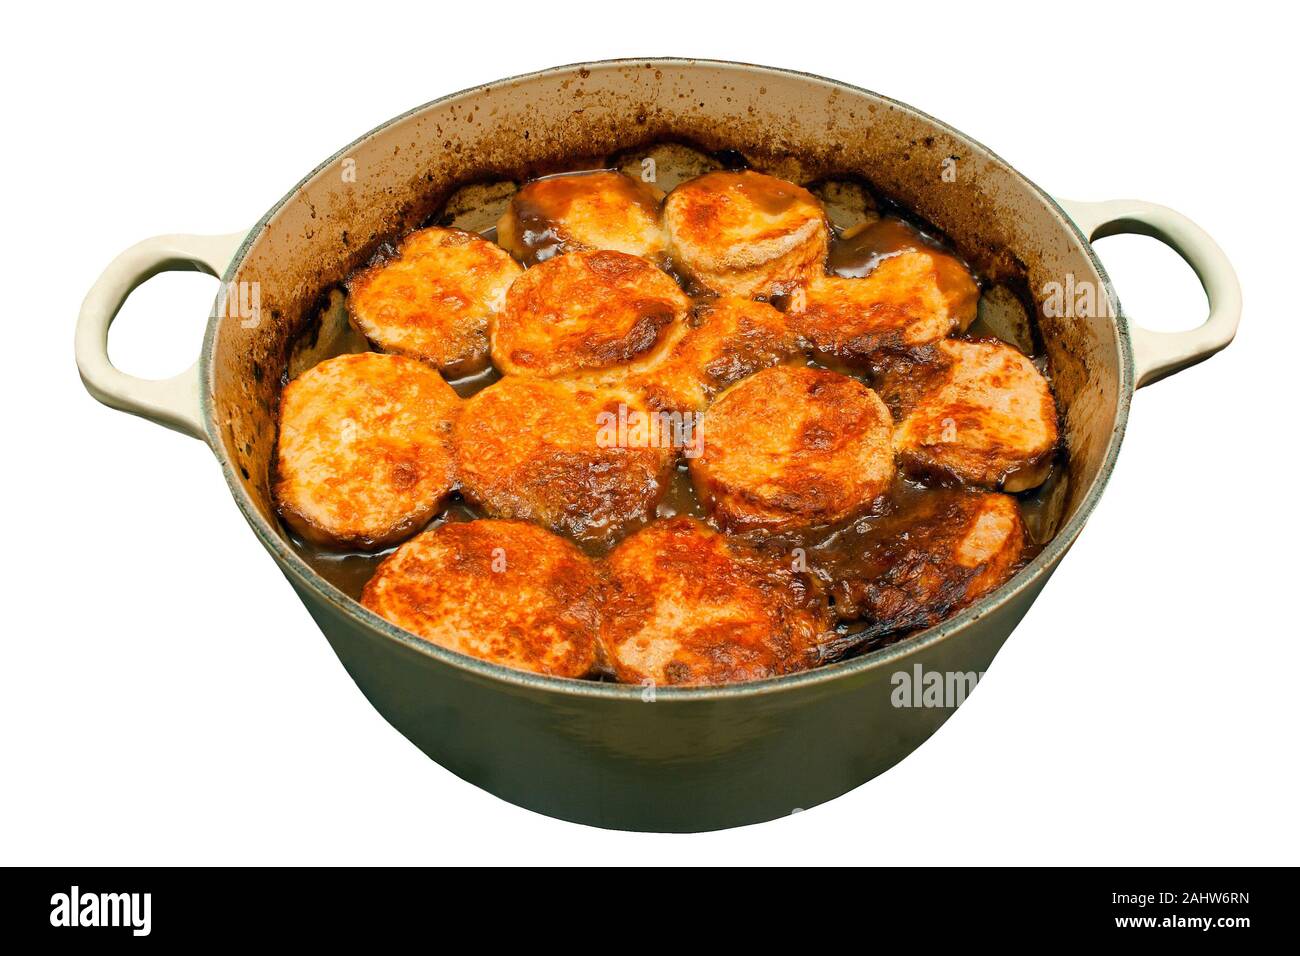 Beef stew and dumplings in a pan on an isolated white background Stock Photo